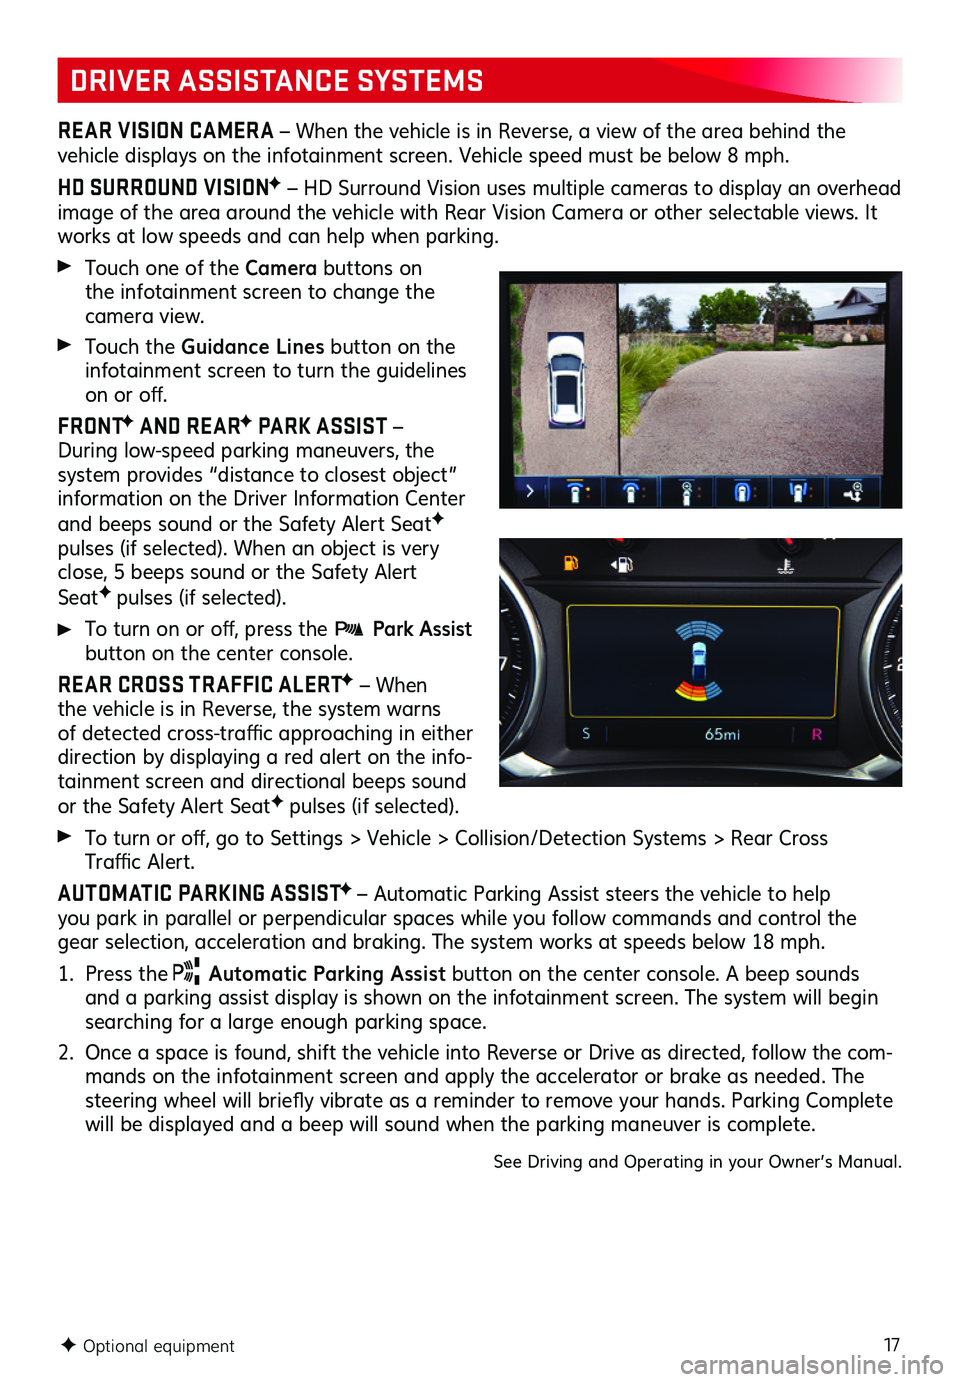 GMC TERRAIN 2021  Get To Know Guide 17
DRIVER ASSISTANCE SYSTEMS
REAR VISION CAMERA – When the vehicle is in Reverse, a view of the area behind the  
vehicle displays on the infotainment screen. Vehicle speed must be below 8 mph.
HD S